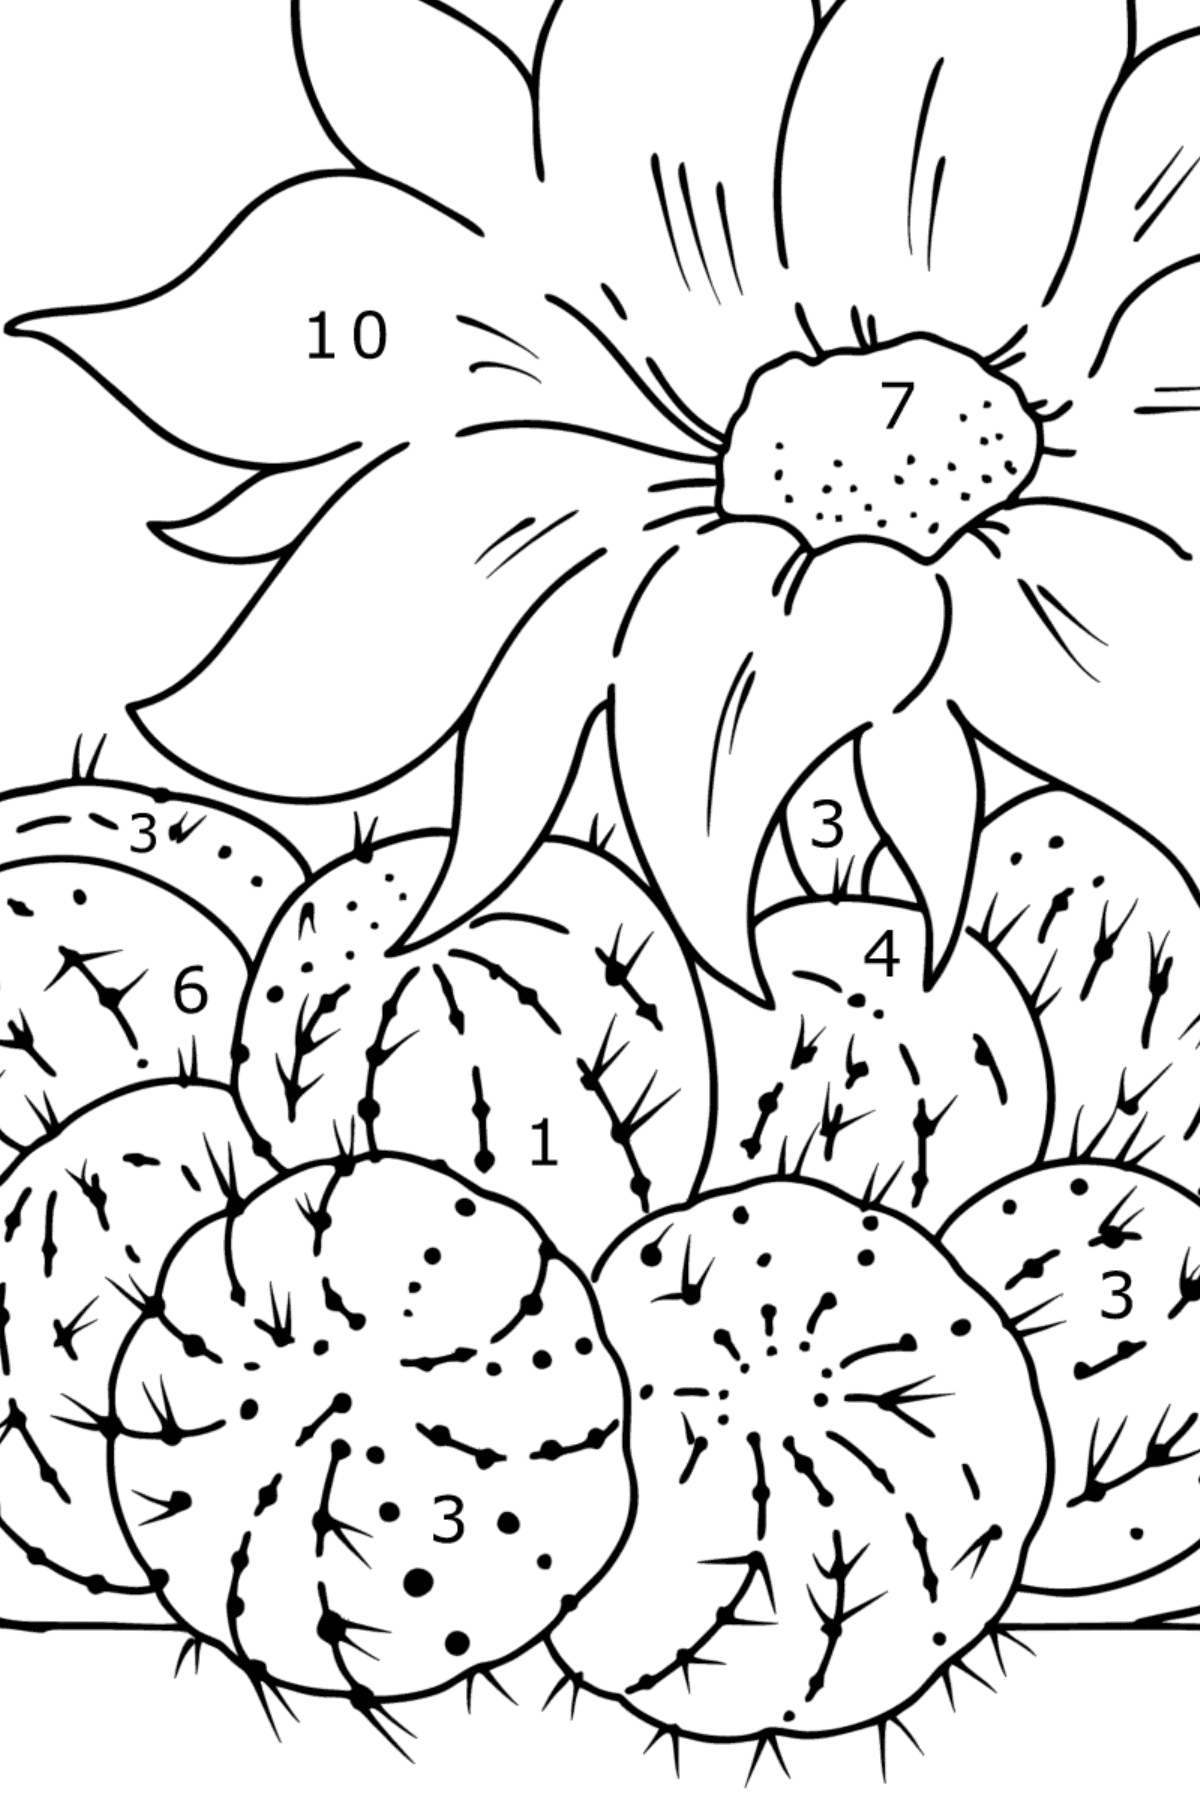 Little Nipple Cactus Coloring page - Coloring by Numbers for Kids